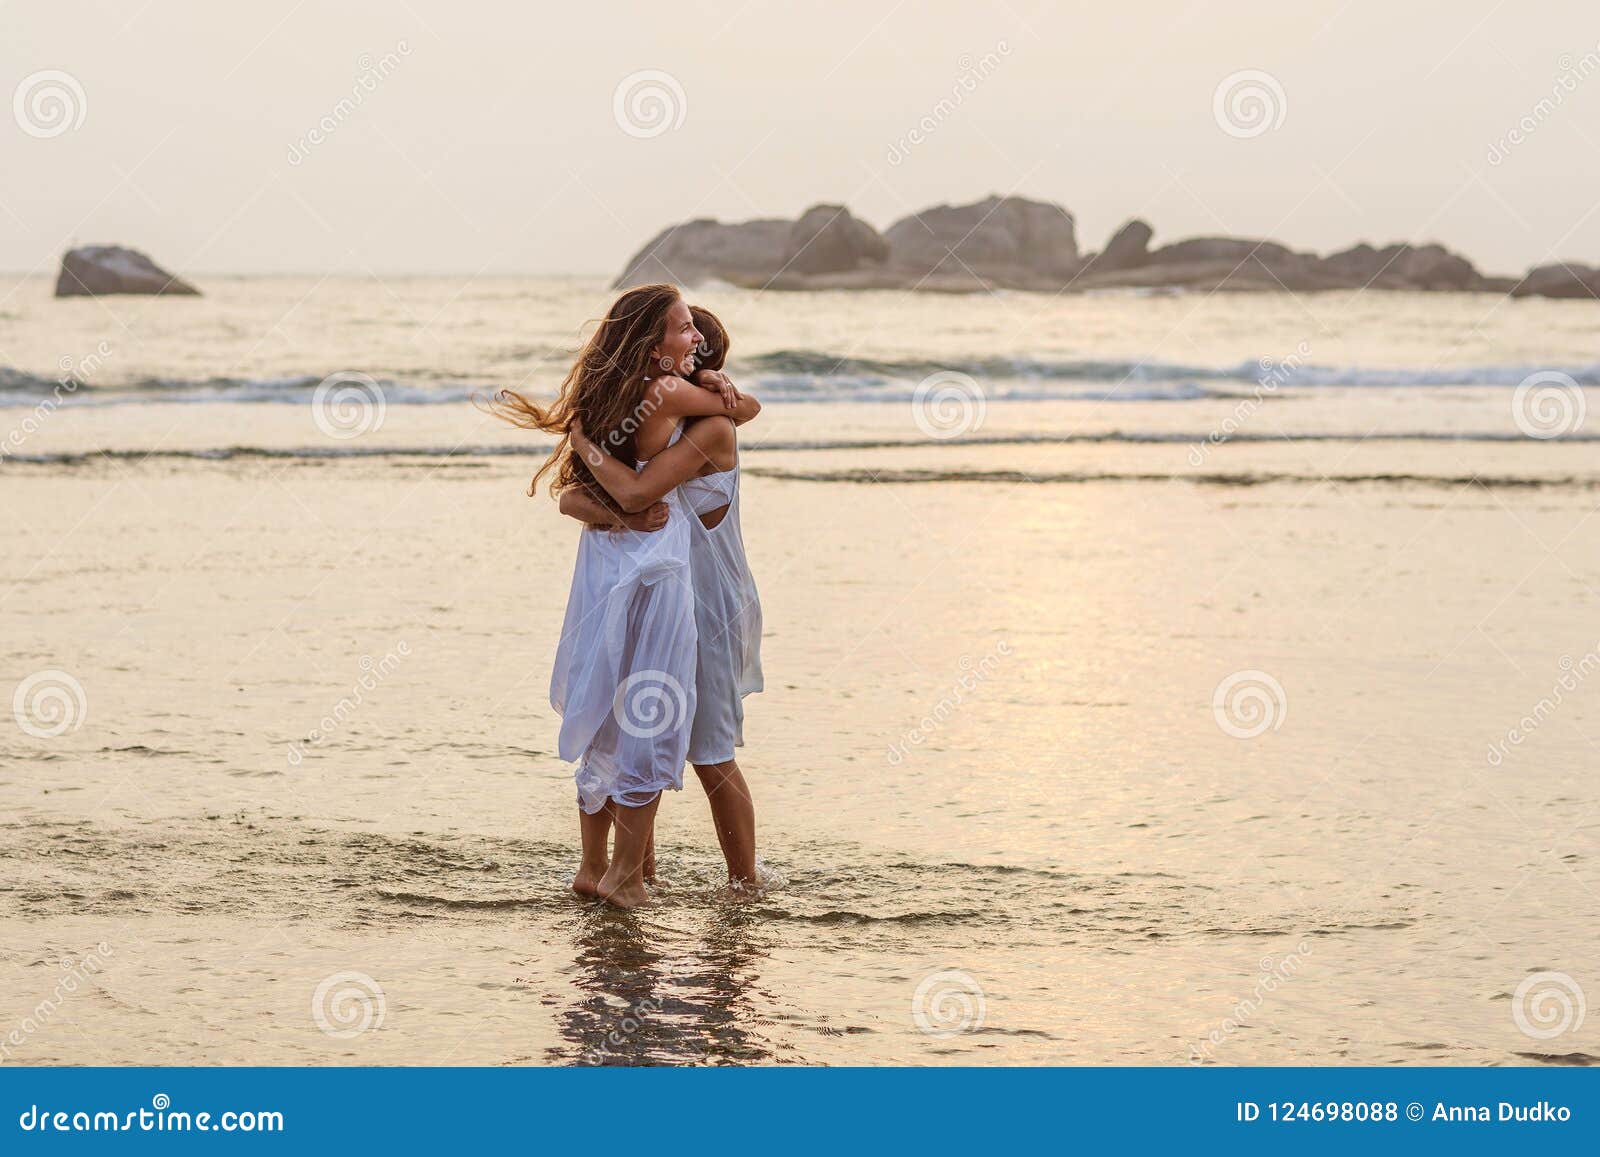 Two Little Naked Sisters Playing On The Beach At Sunset 